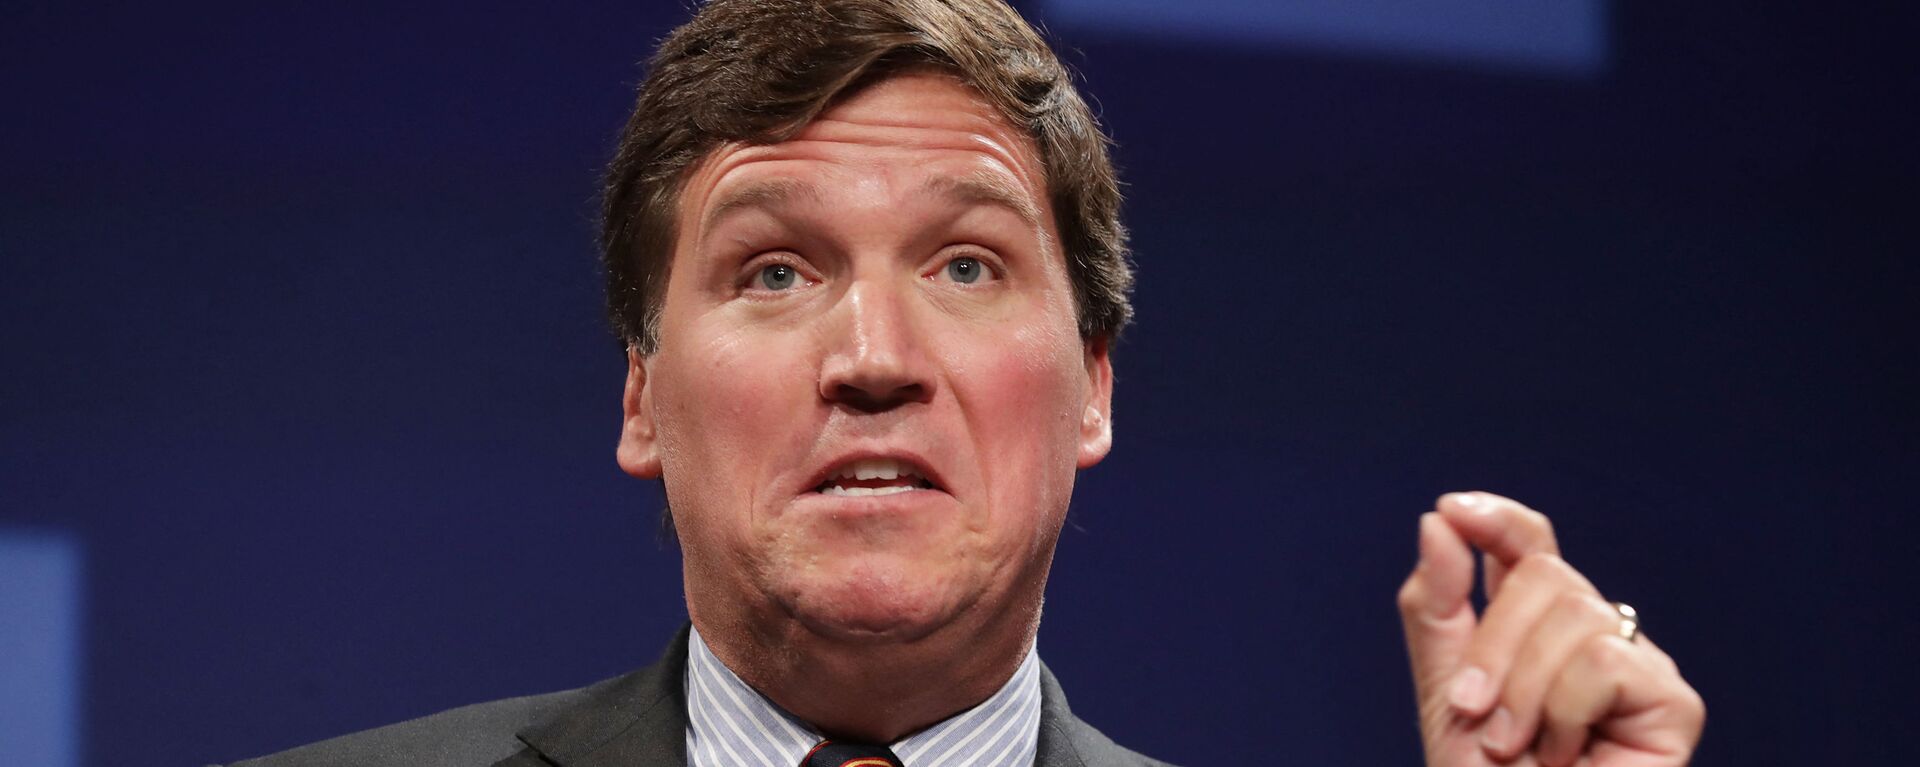 Fox News host Tucker Carlson discusses 'Populism and the Right' during the National Review Institute's Ideas Summit at the Mandarin Oriental Hotel March 29, 2019 in Washington, DC.  - Sputnik International, 1920, 27.04.2023